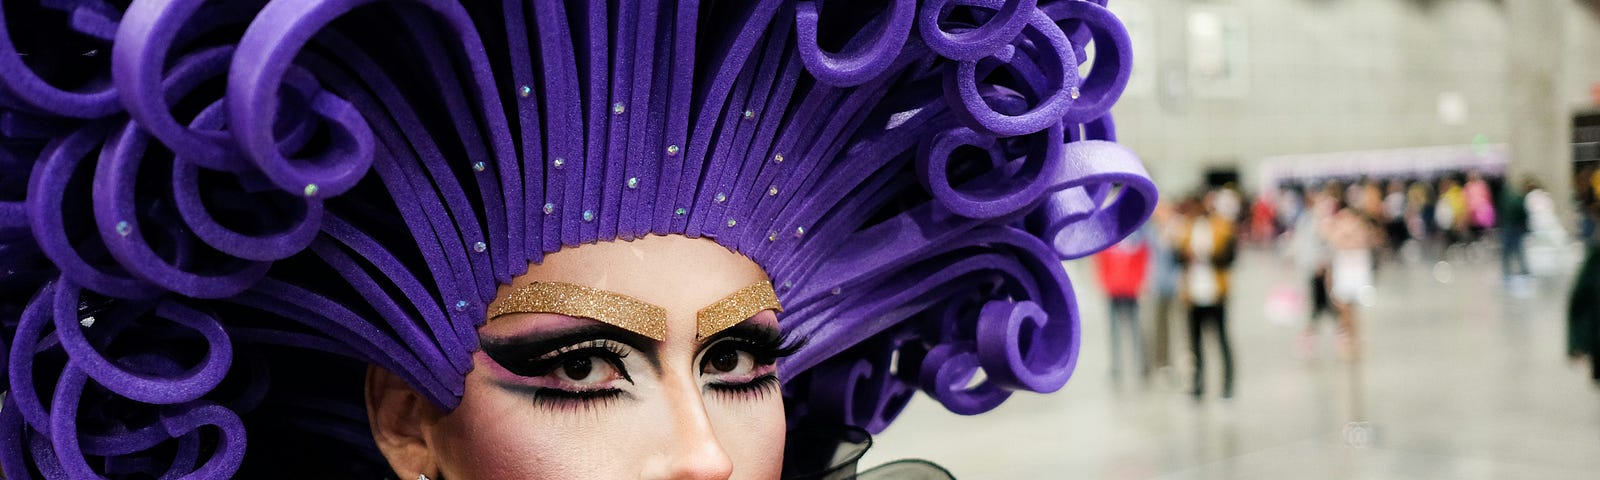 A drag performer with a bright purple wig looks at the camera